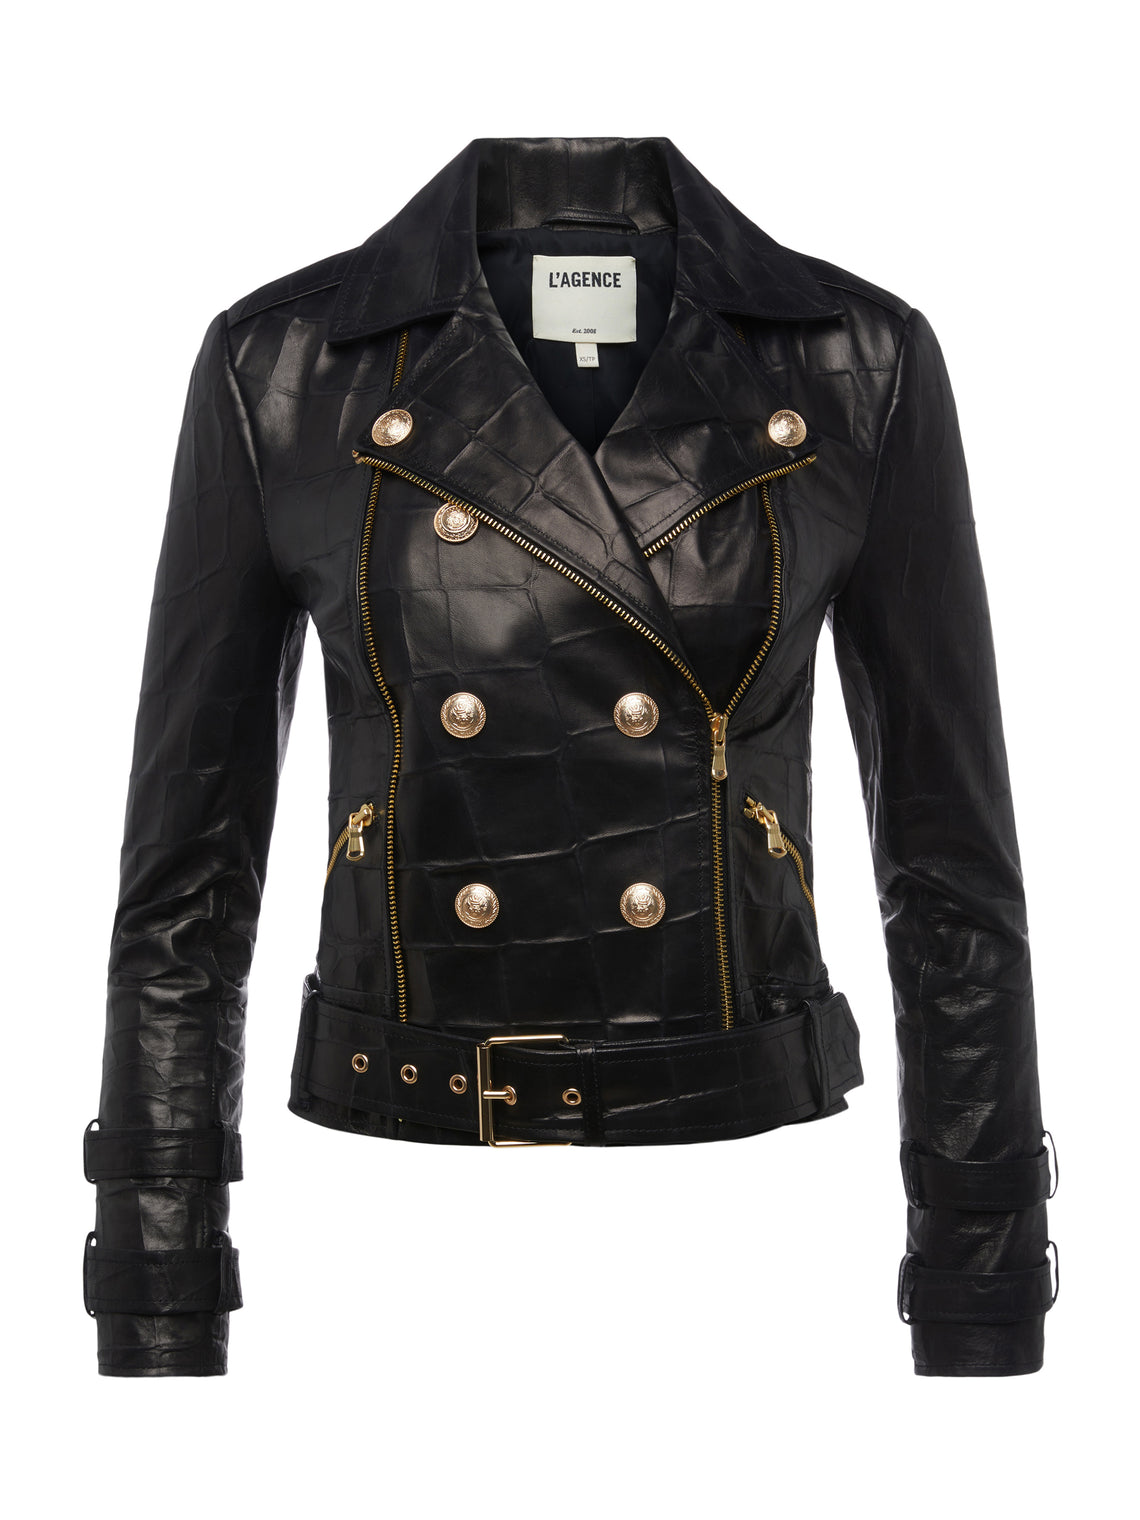 L'AGENCE - Women's Leather & Suede Jackets, Blazers & Pants